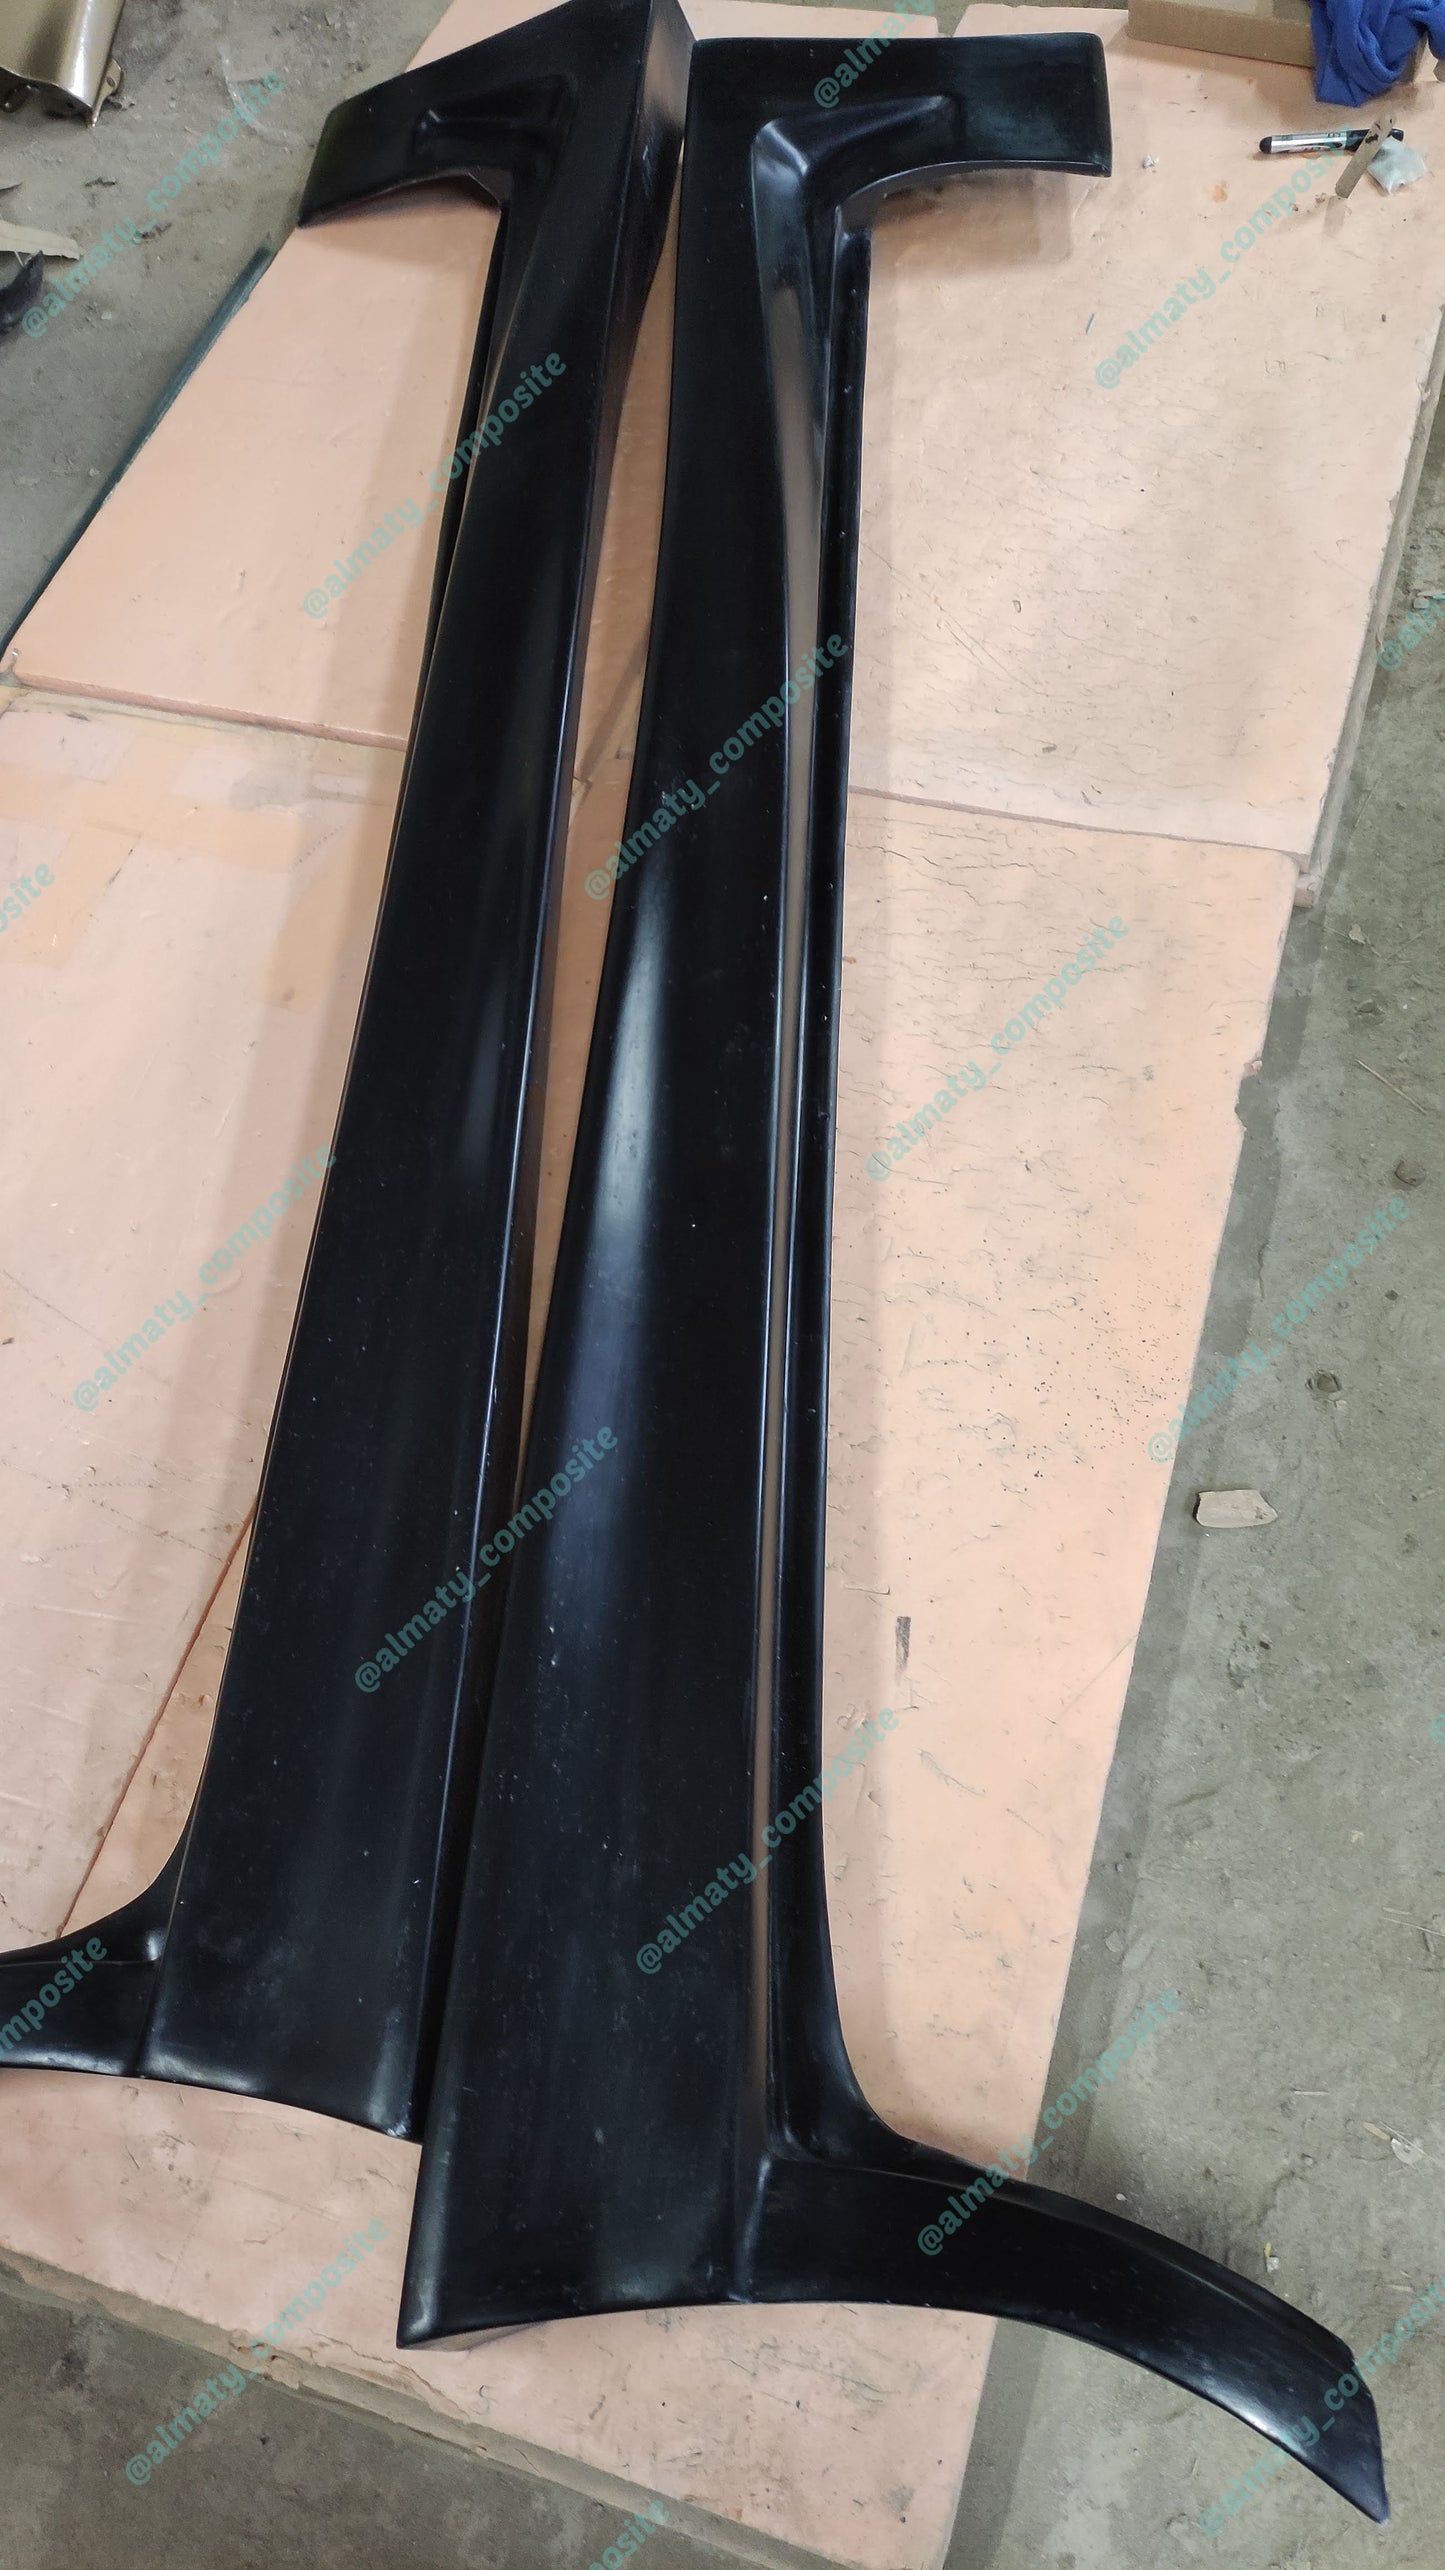 Side Skirts Admiration for Totoya Aristo gs300 jzs147 Tuning [AC]